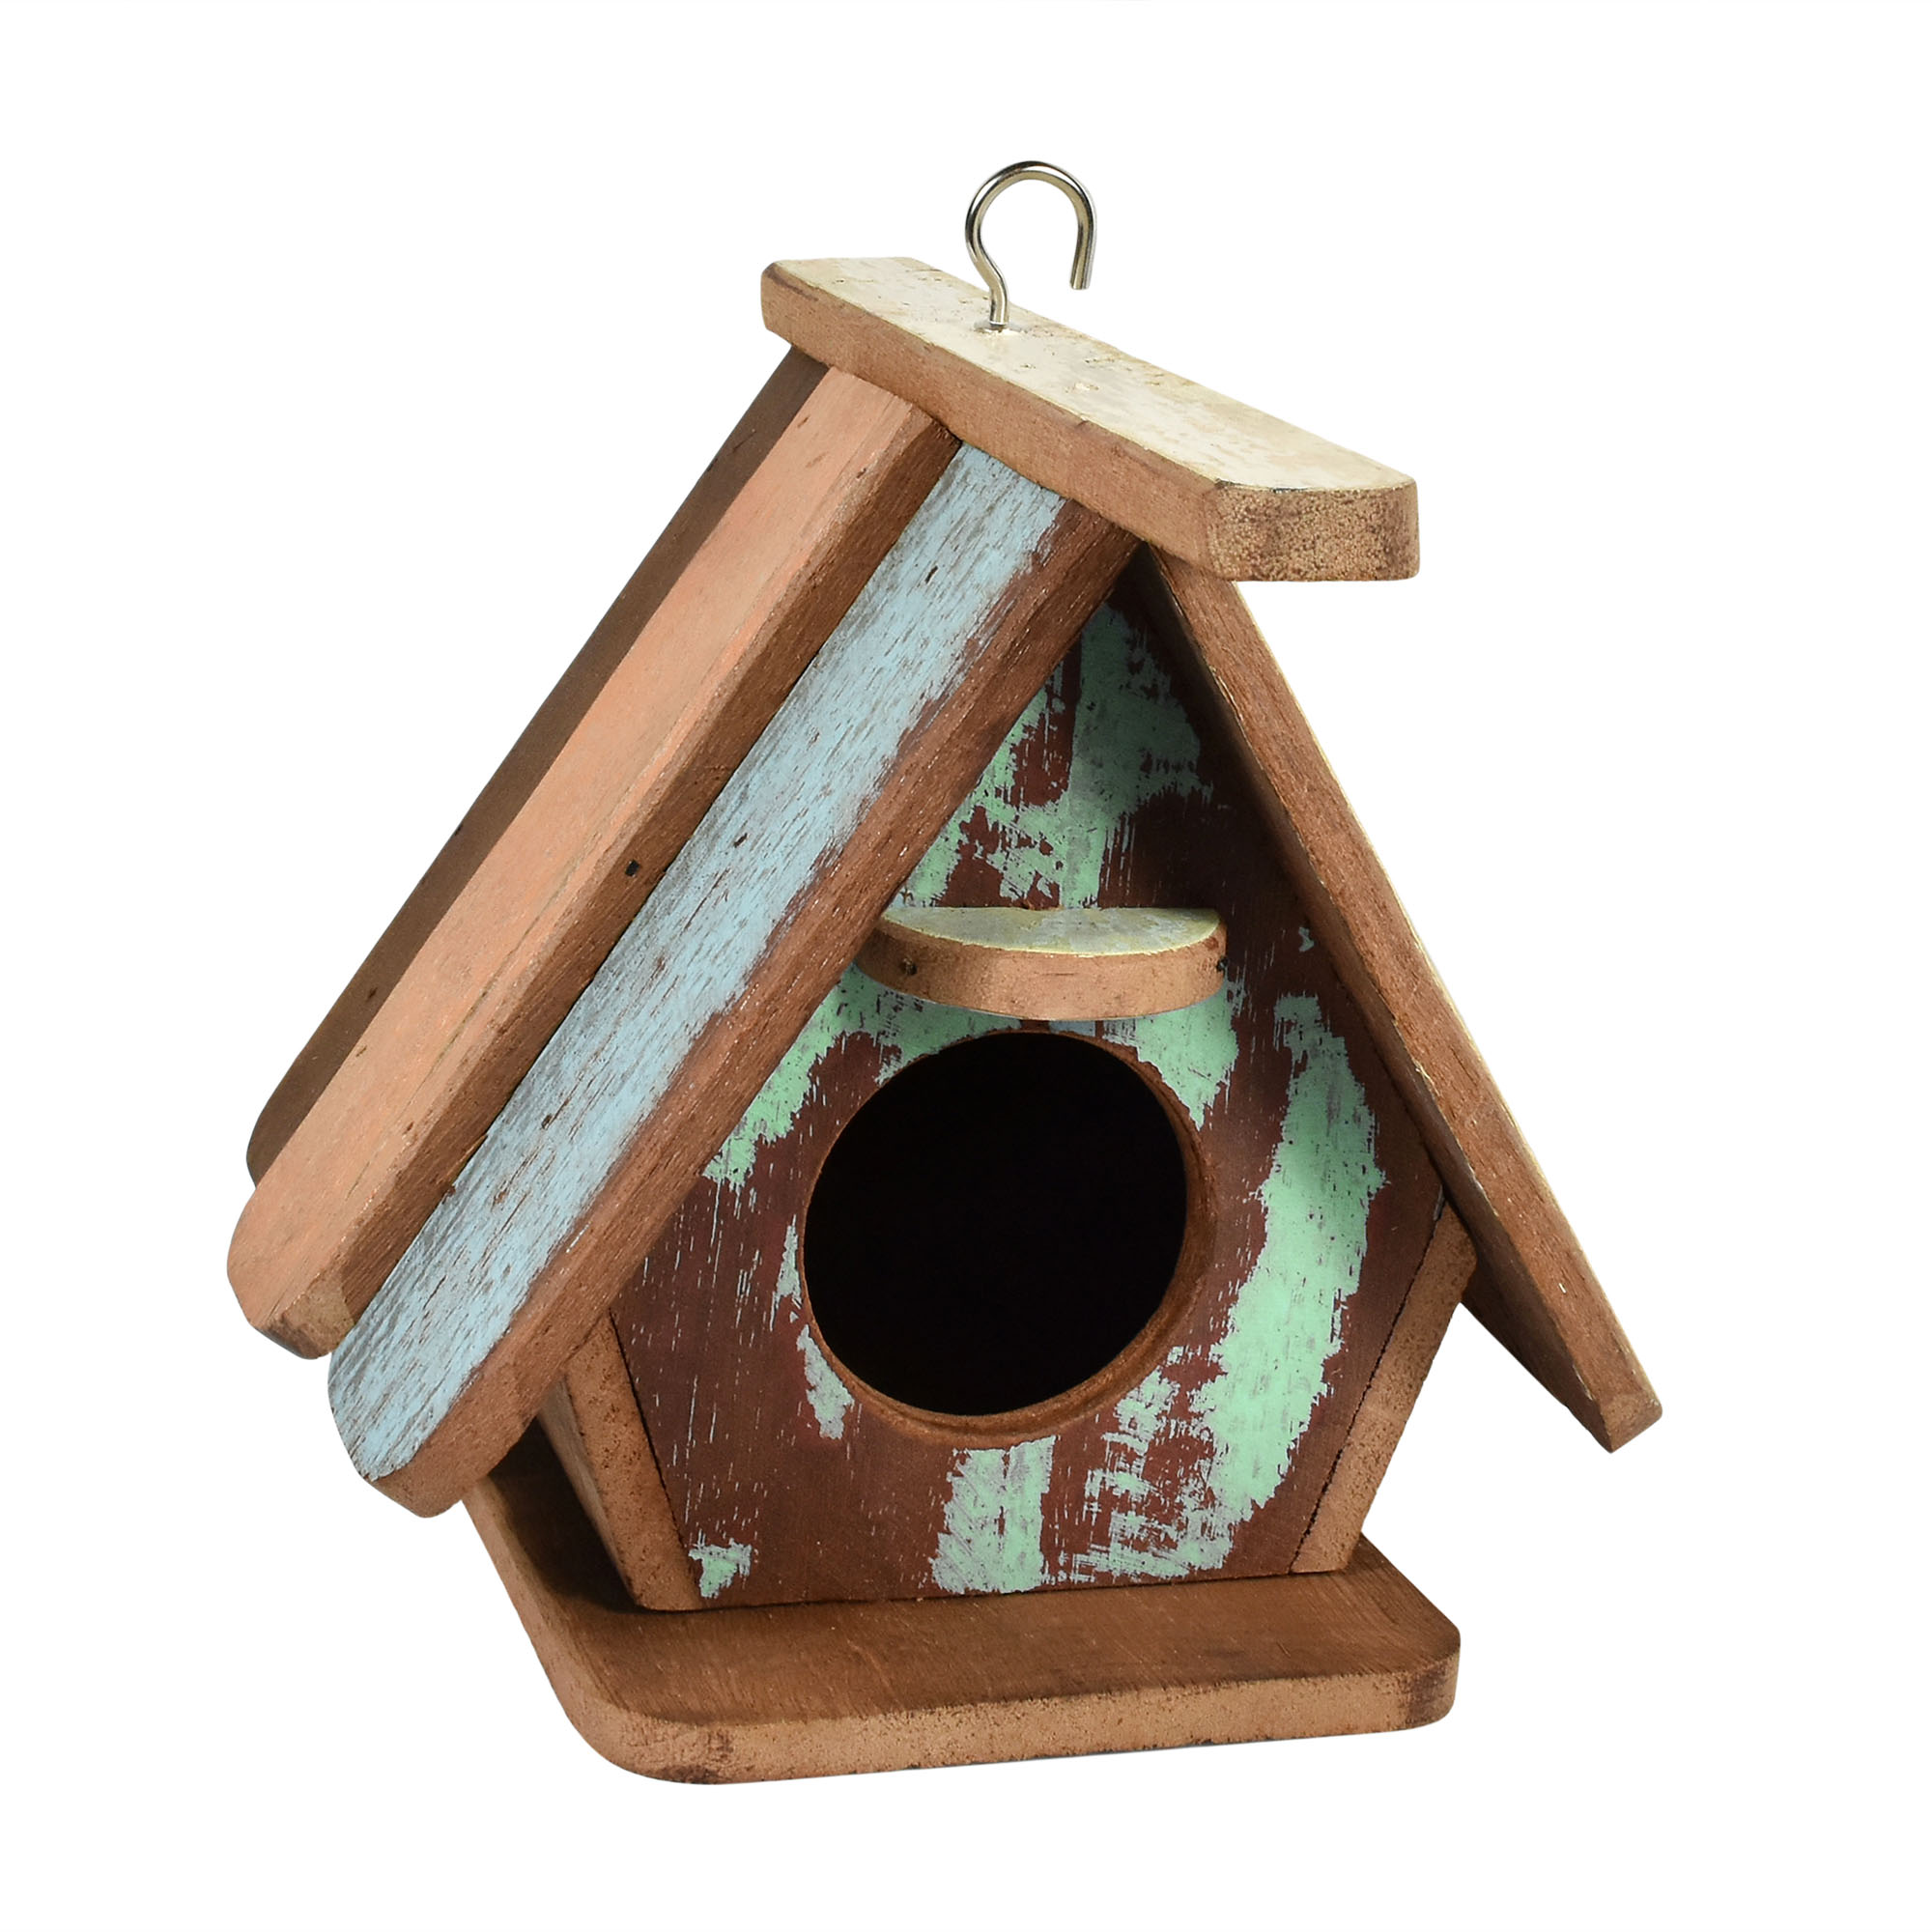 Handcrafted Pastel Bird House Wood Hanging Decor - image 1 of 5